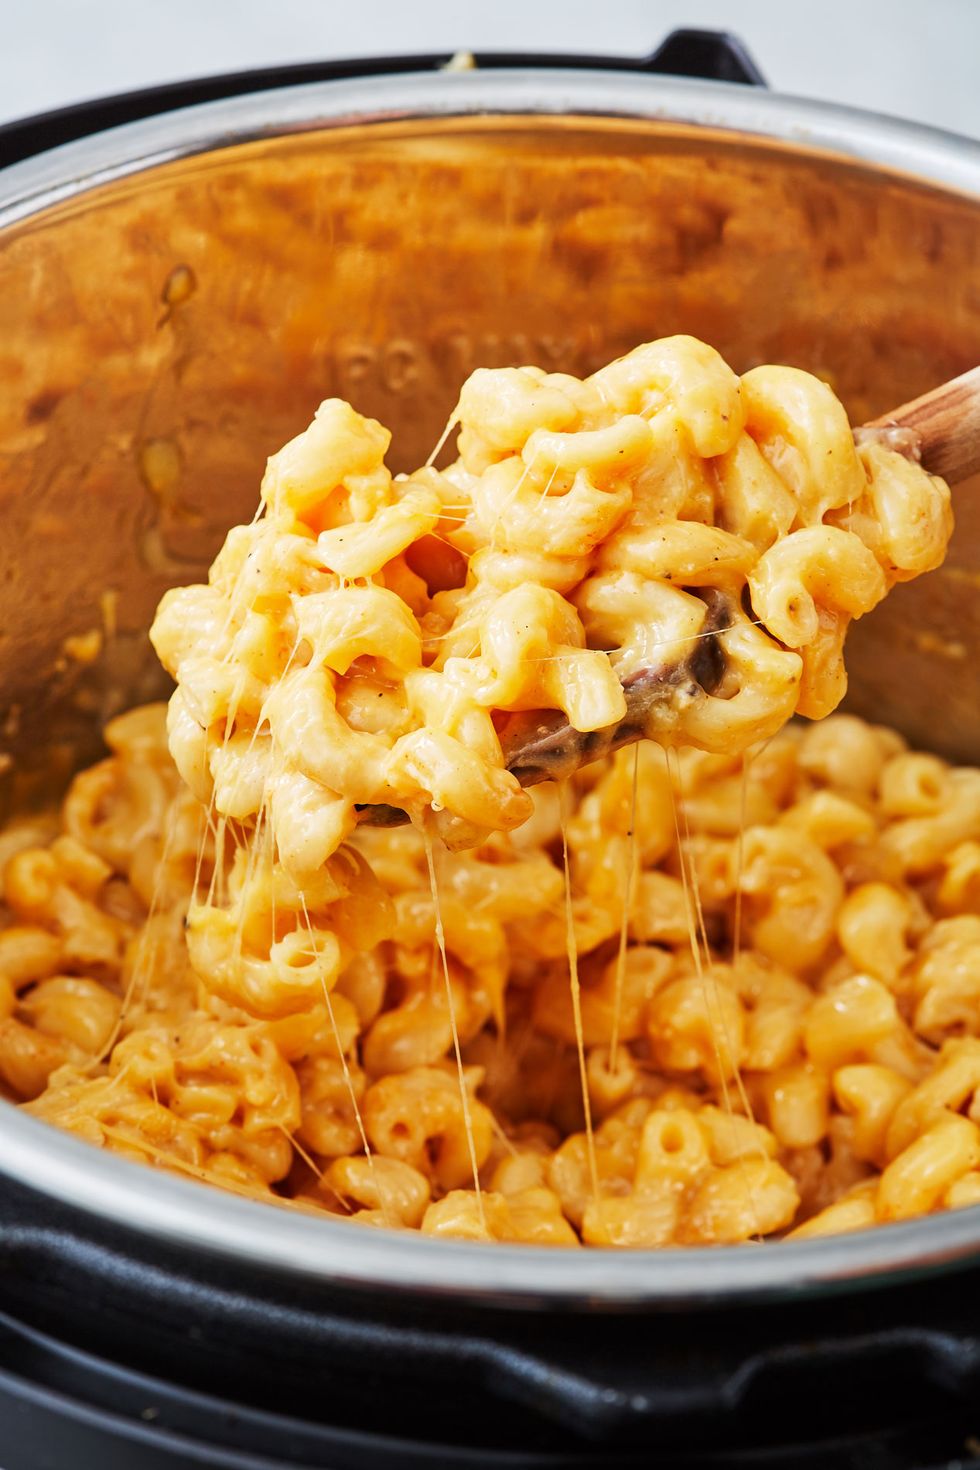 https://hips.hearstapps.com/hmg-prod/images/190402-instant-pot-mac-and-cheese-vertical-202-1555104888.jpg?crop=0.9997369113391213xw:1xh;center,top&resize=980:*